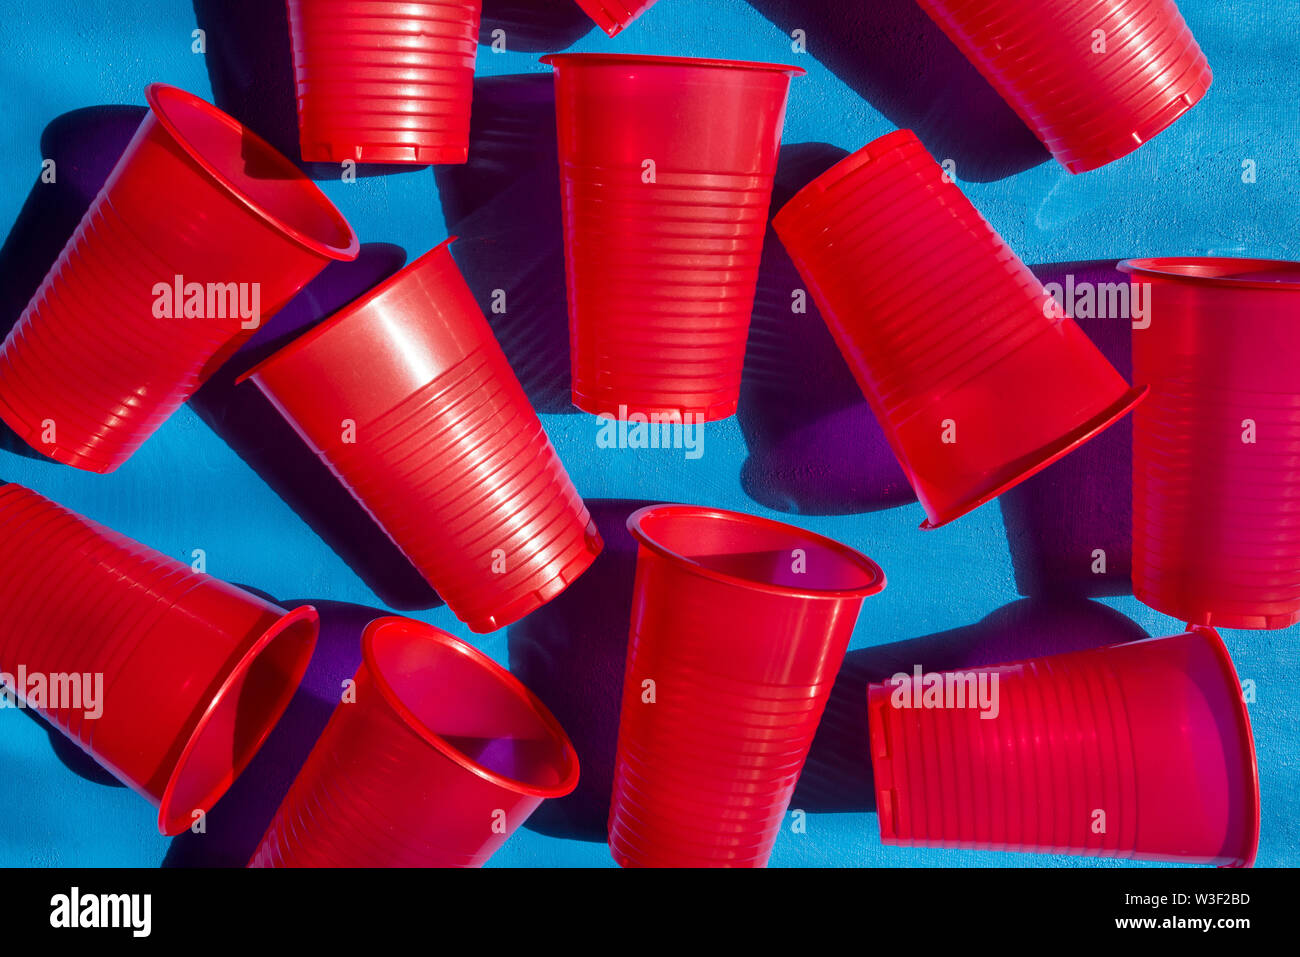 https://c8.alamy.com/comp/W3F2BD/red-plastic-cups-on-a-blue-background-composition-from-empty-plastic-glasses-many-disposable-beverage-containers-view-from-above-W3F2BD.jpg